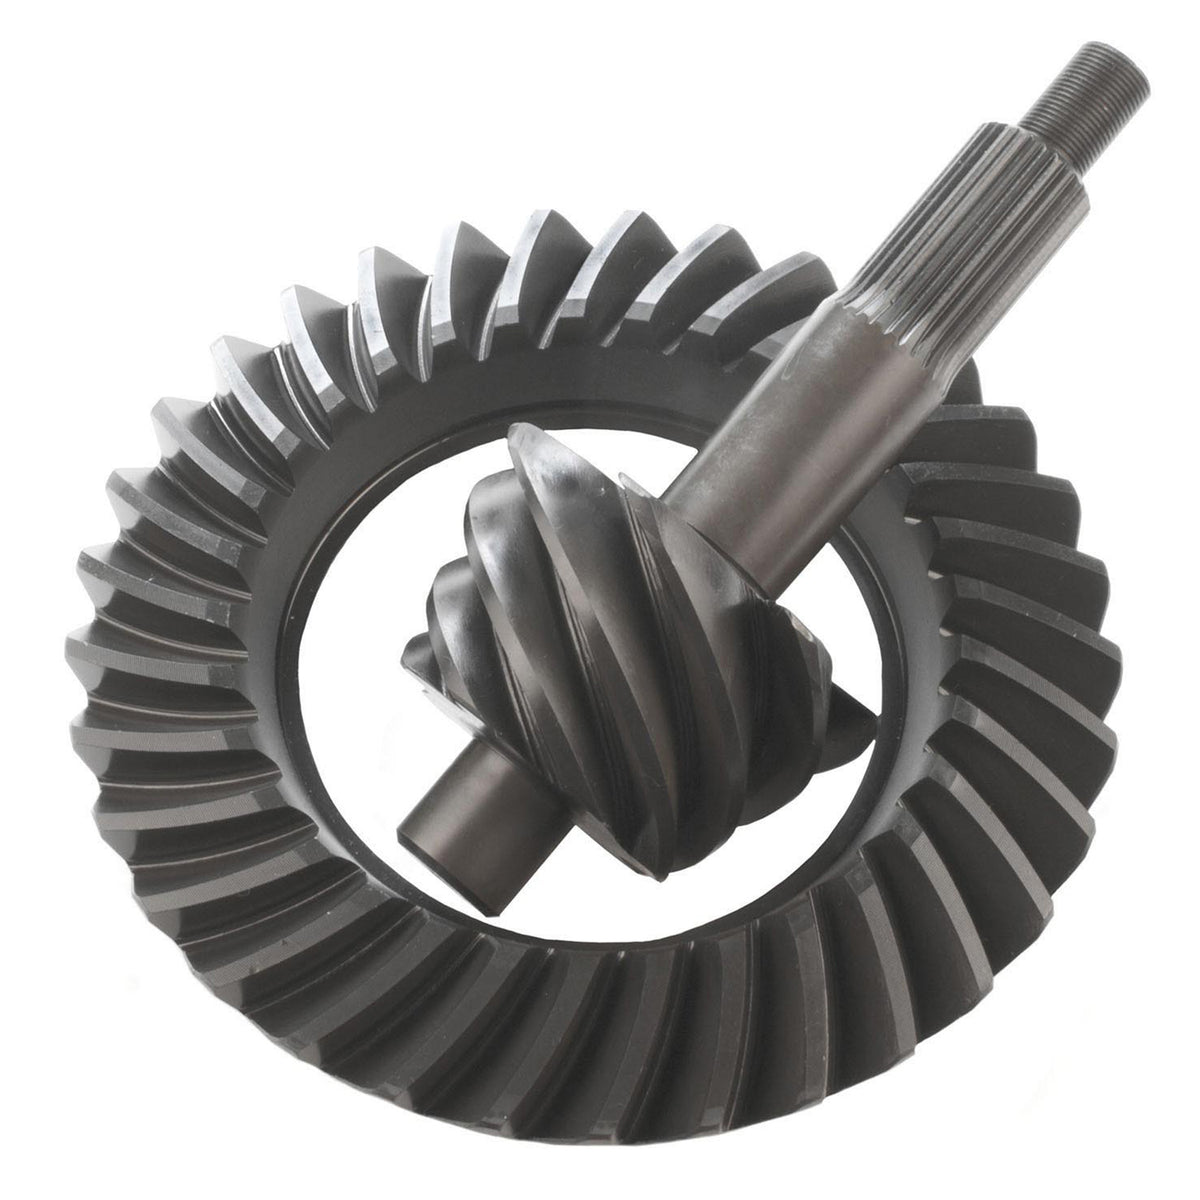 Excel Ring & Pinion Gear Set Ford 9in 4.71 Ratio